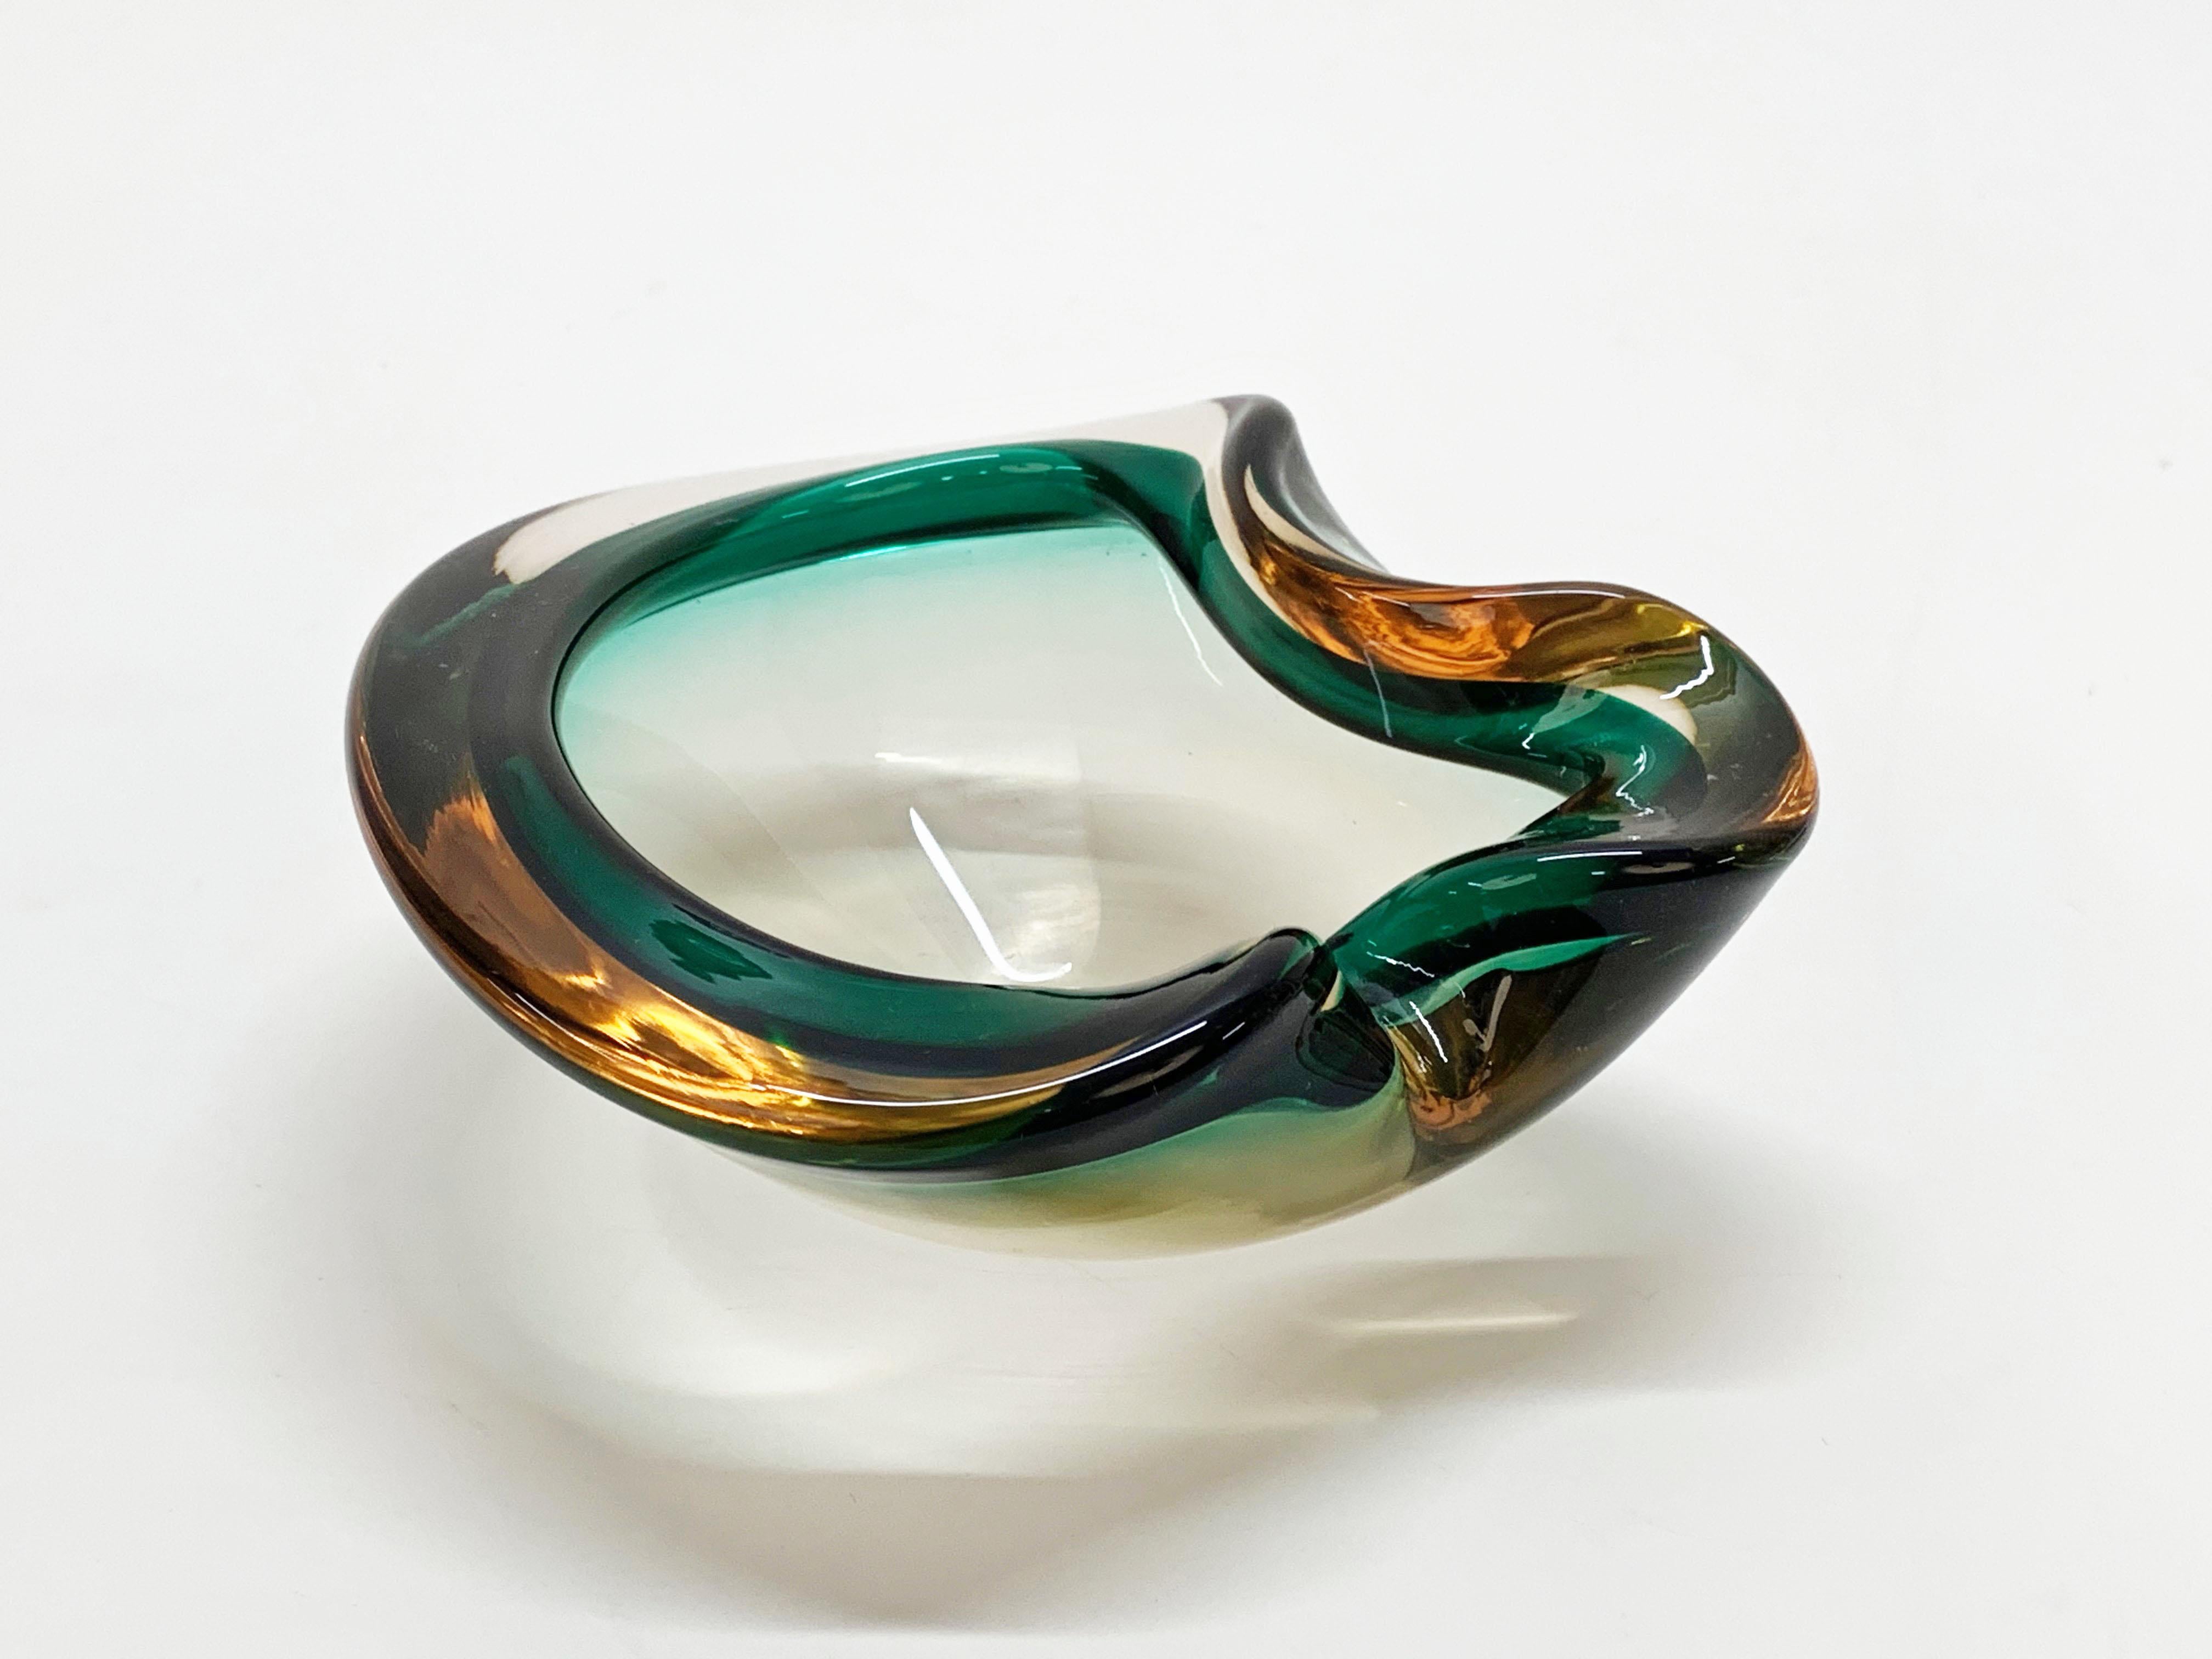 Heart Green and Amber, Glass Sommerso Murano Glass Bowl or Ashtray, Italy, 1960s 2